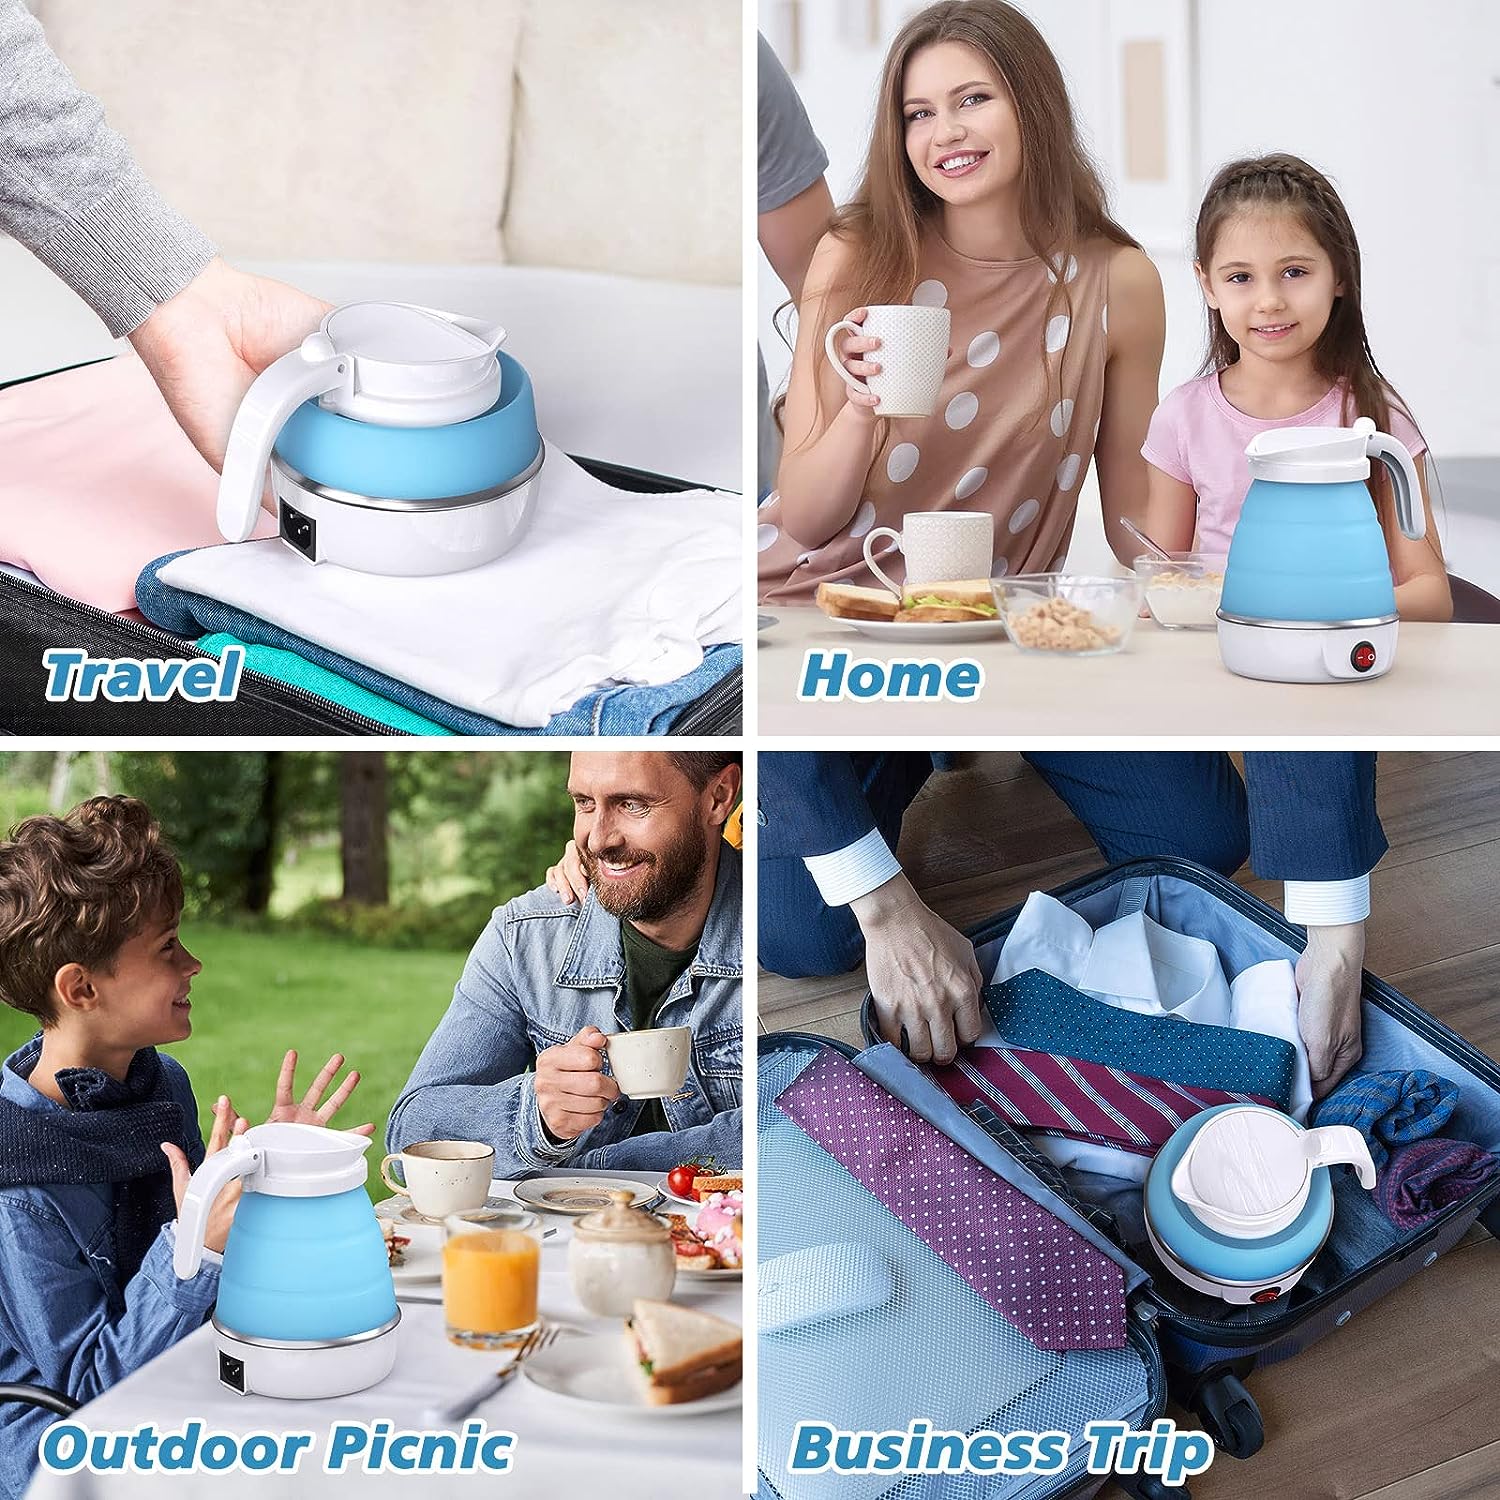 Collapsible Kettle